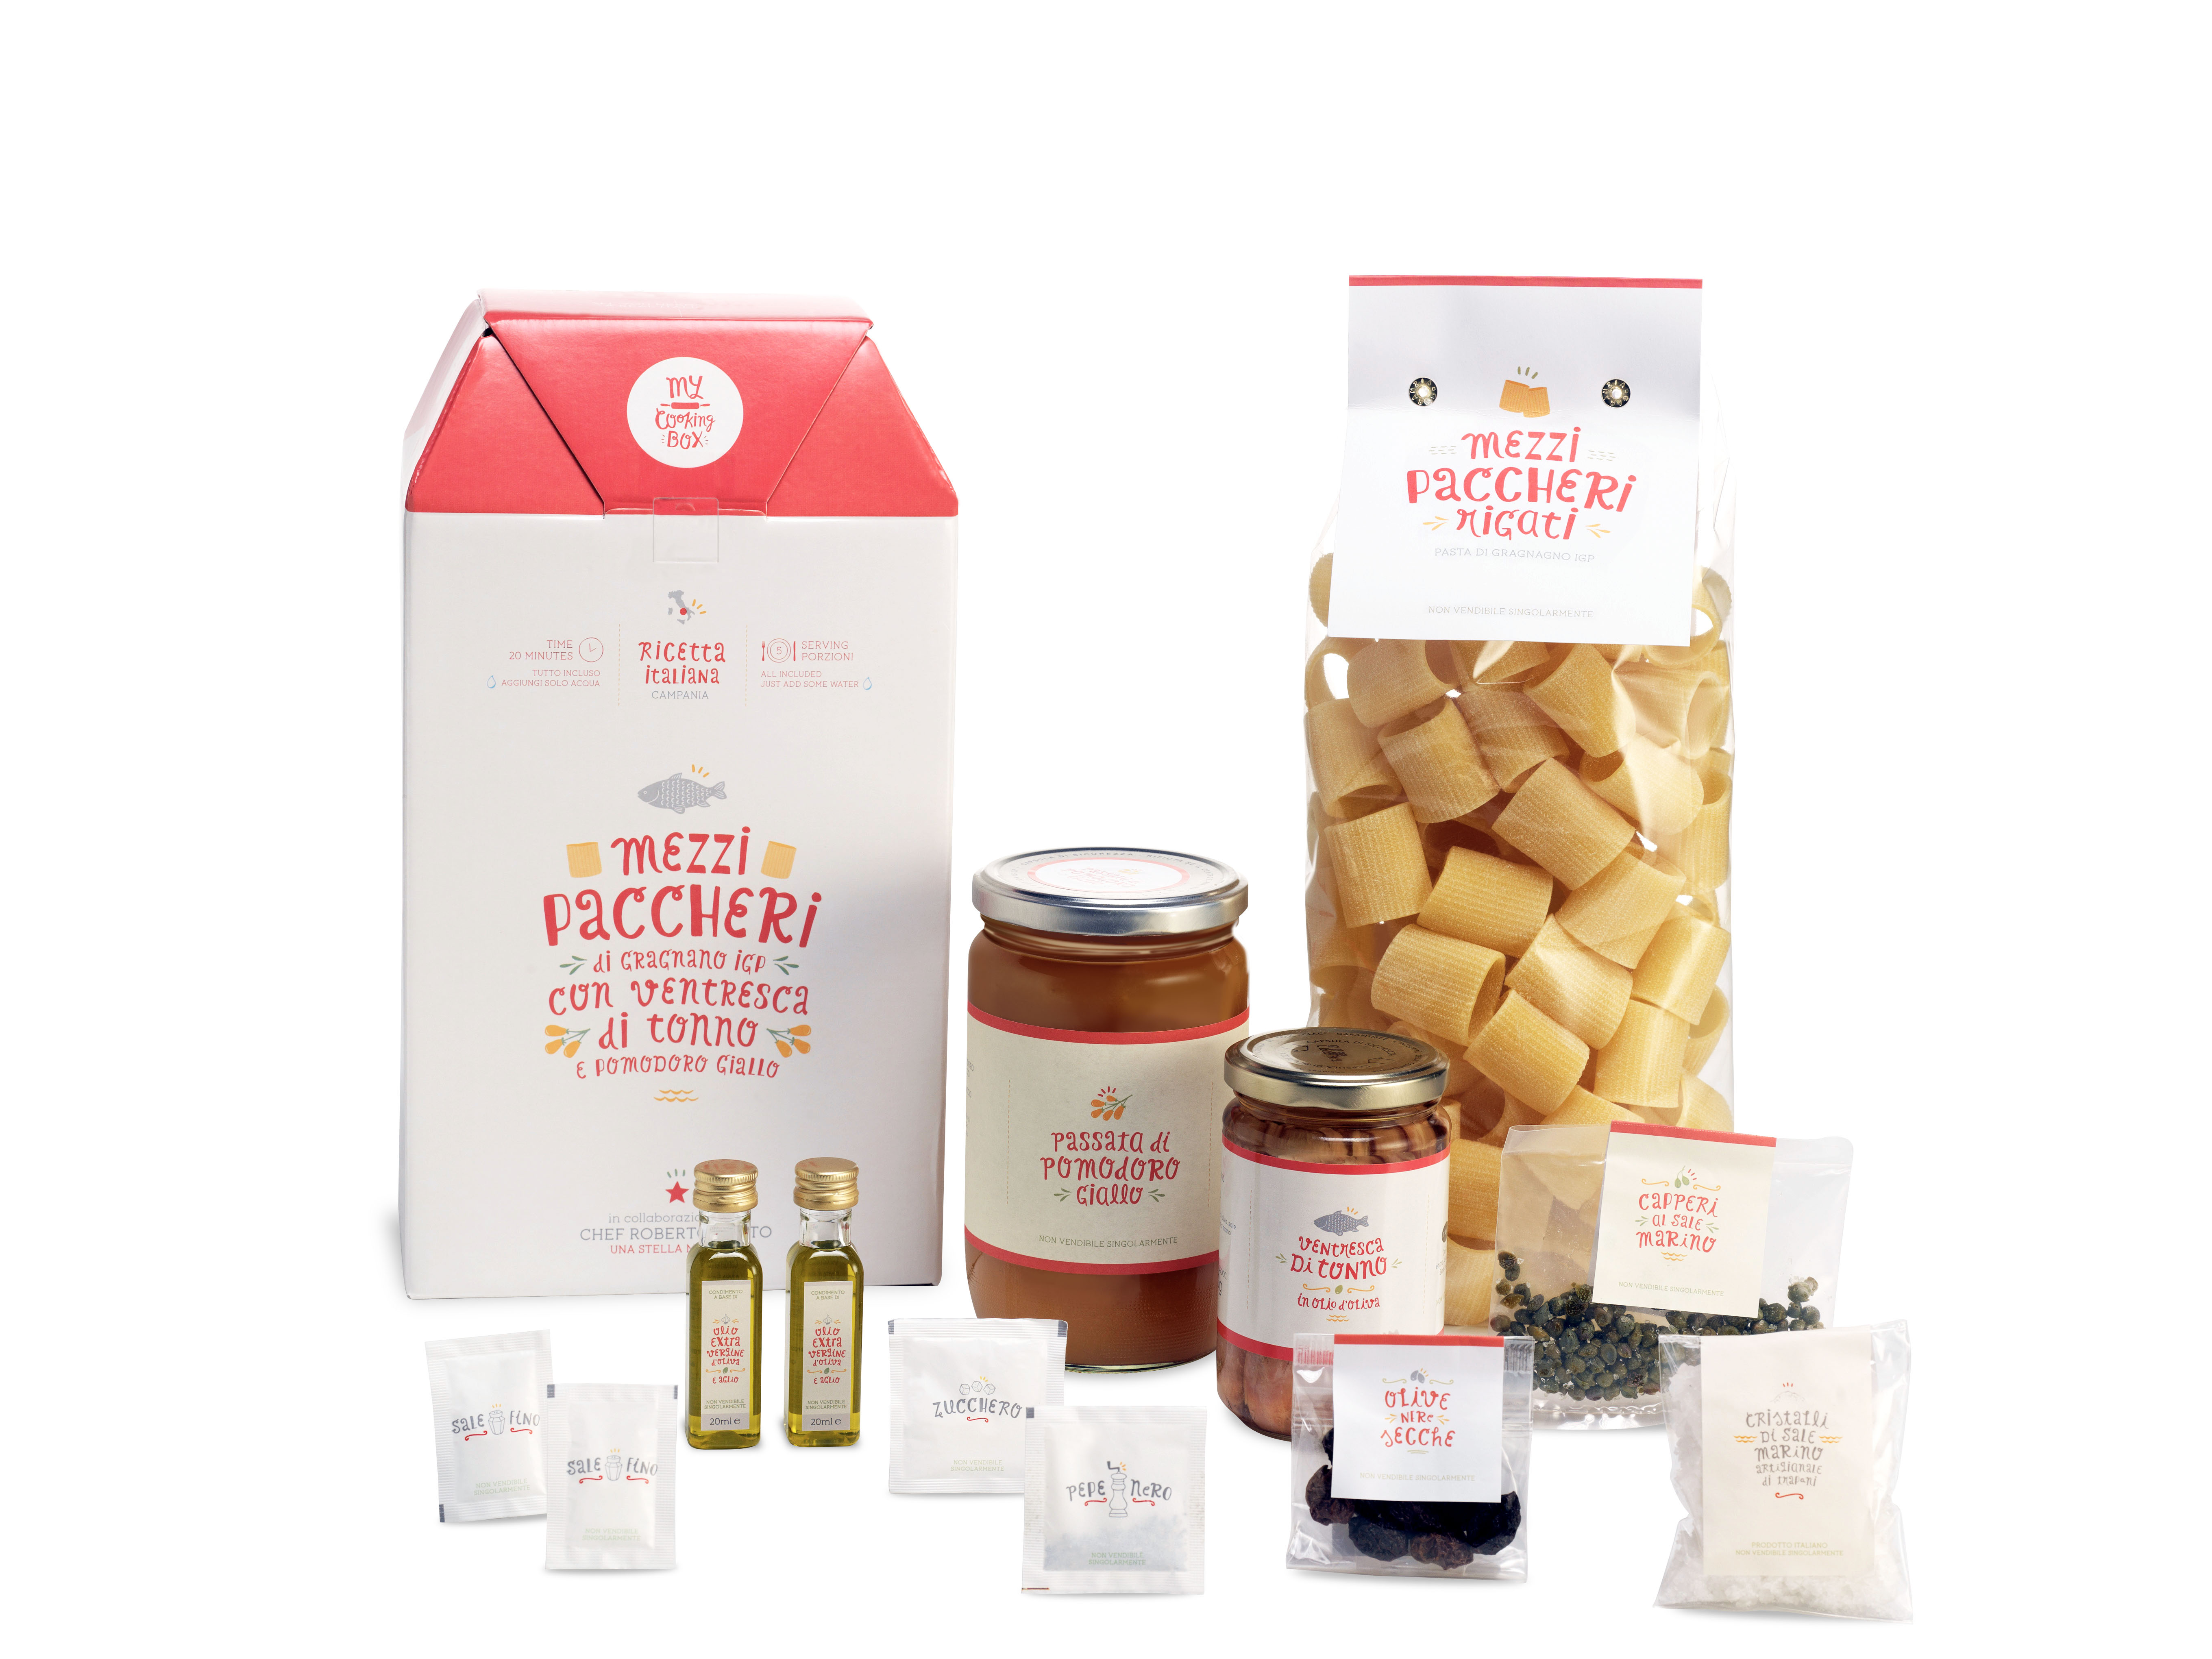 The Cooking Box for cooking Mezzi Paccheri